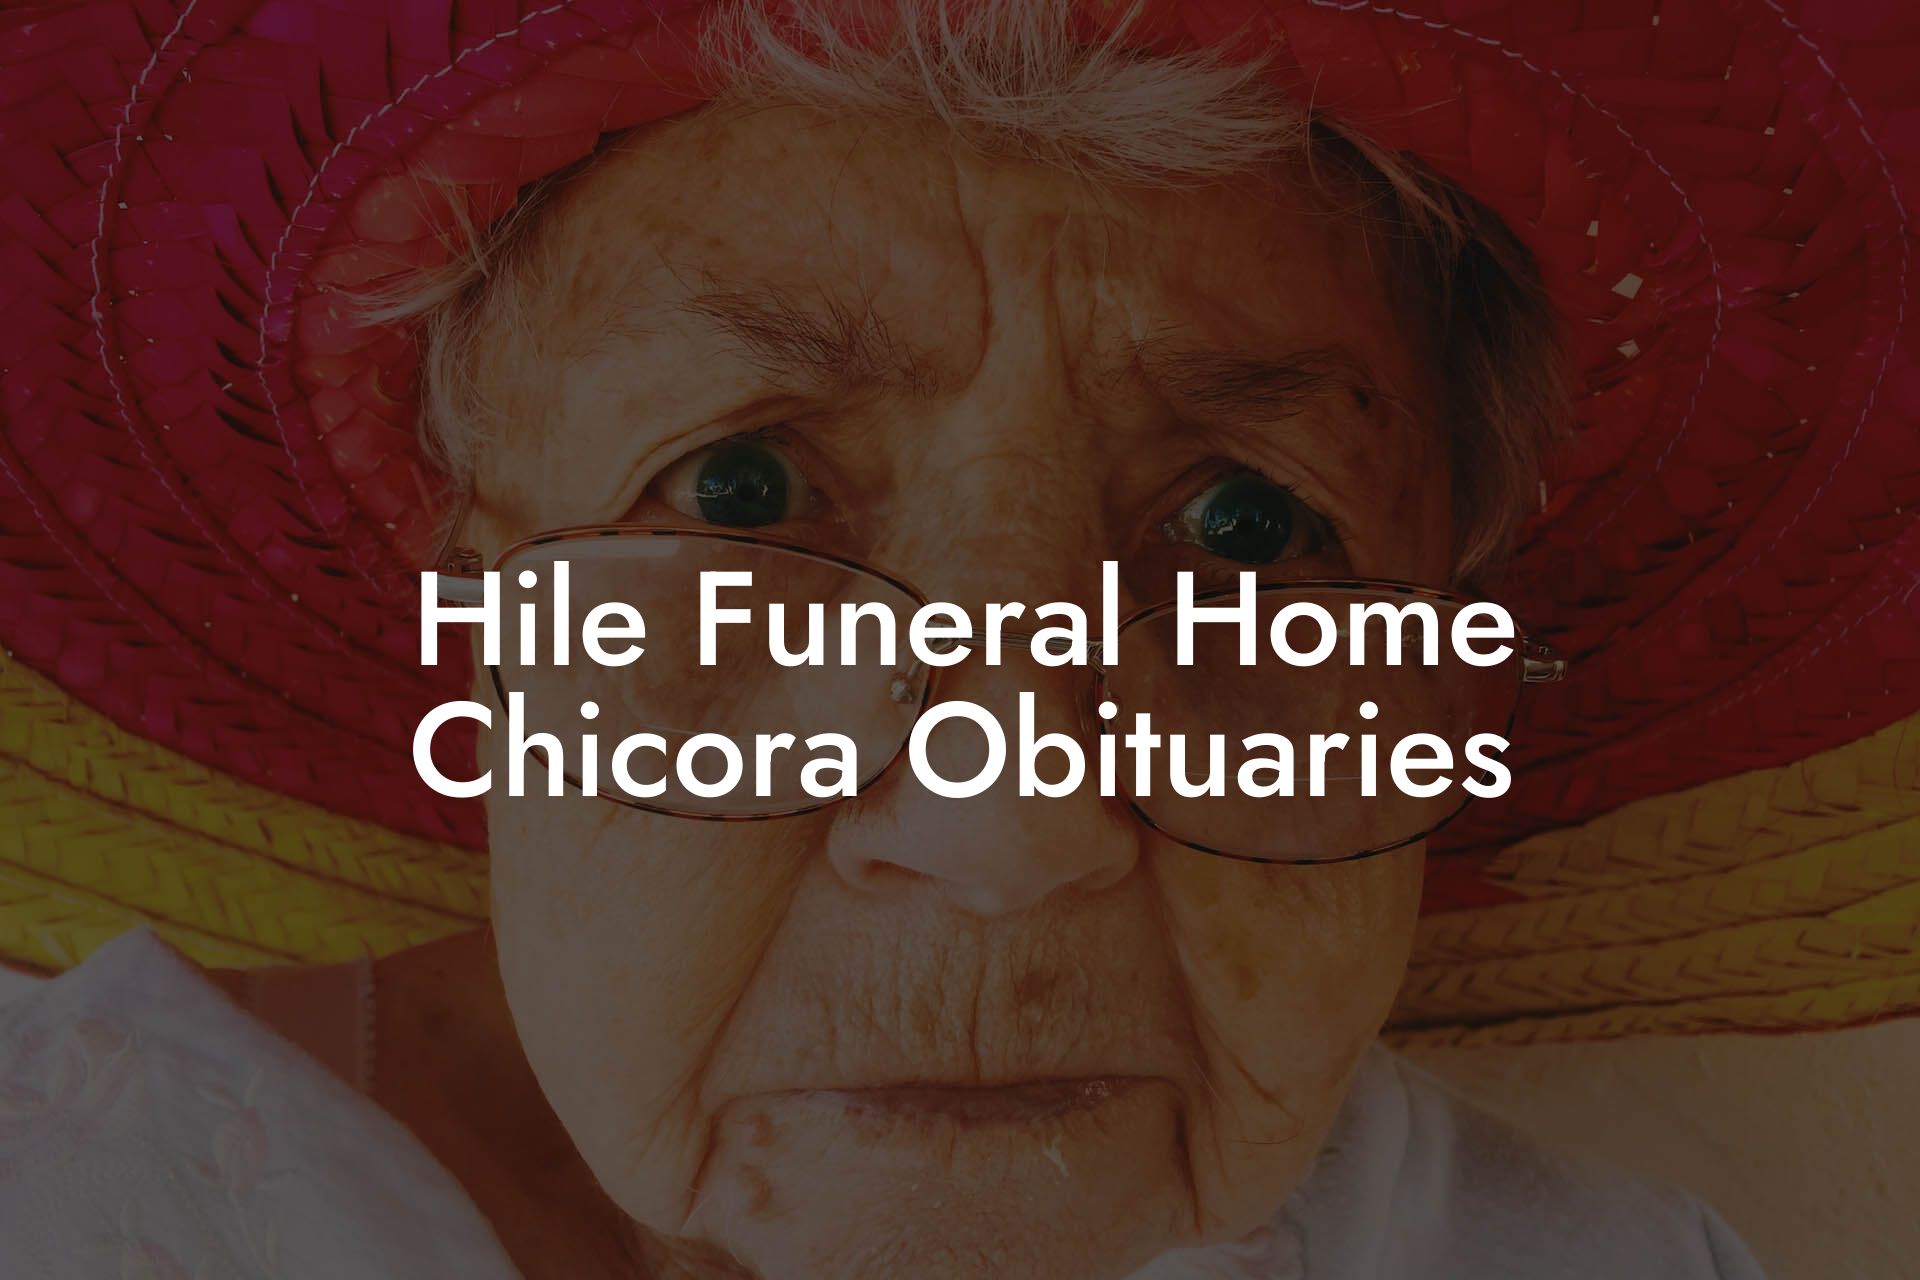 Hile Funeral Home Chicora Obituaries